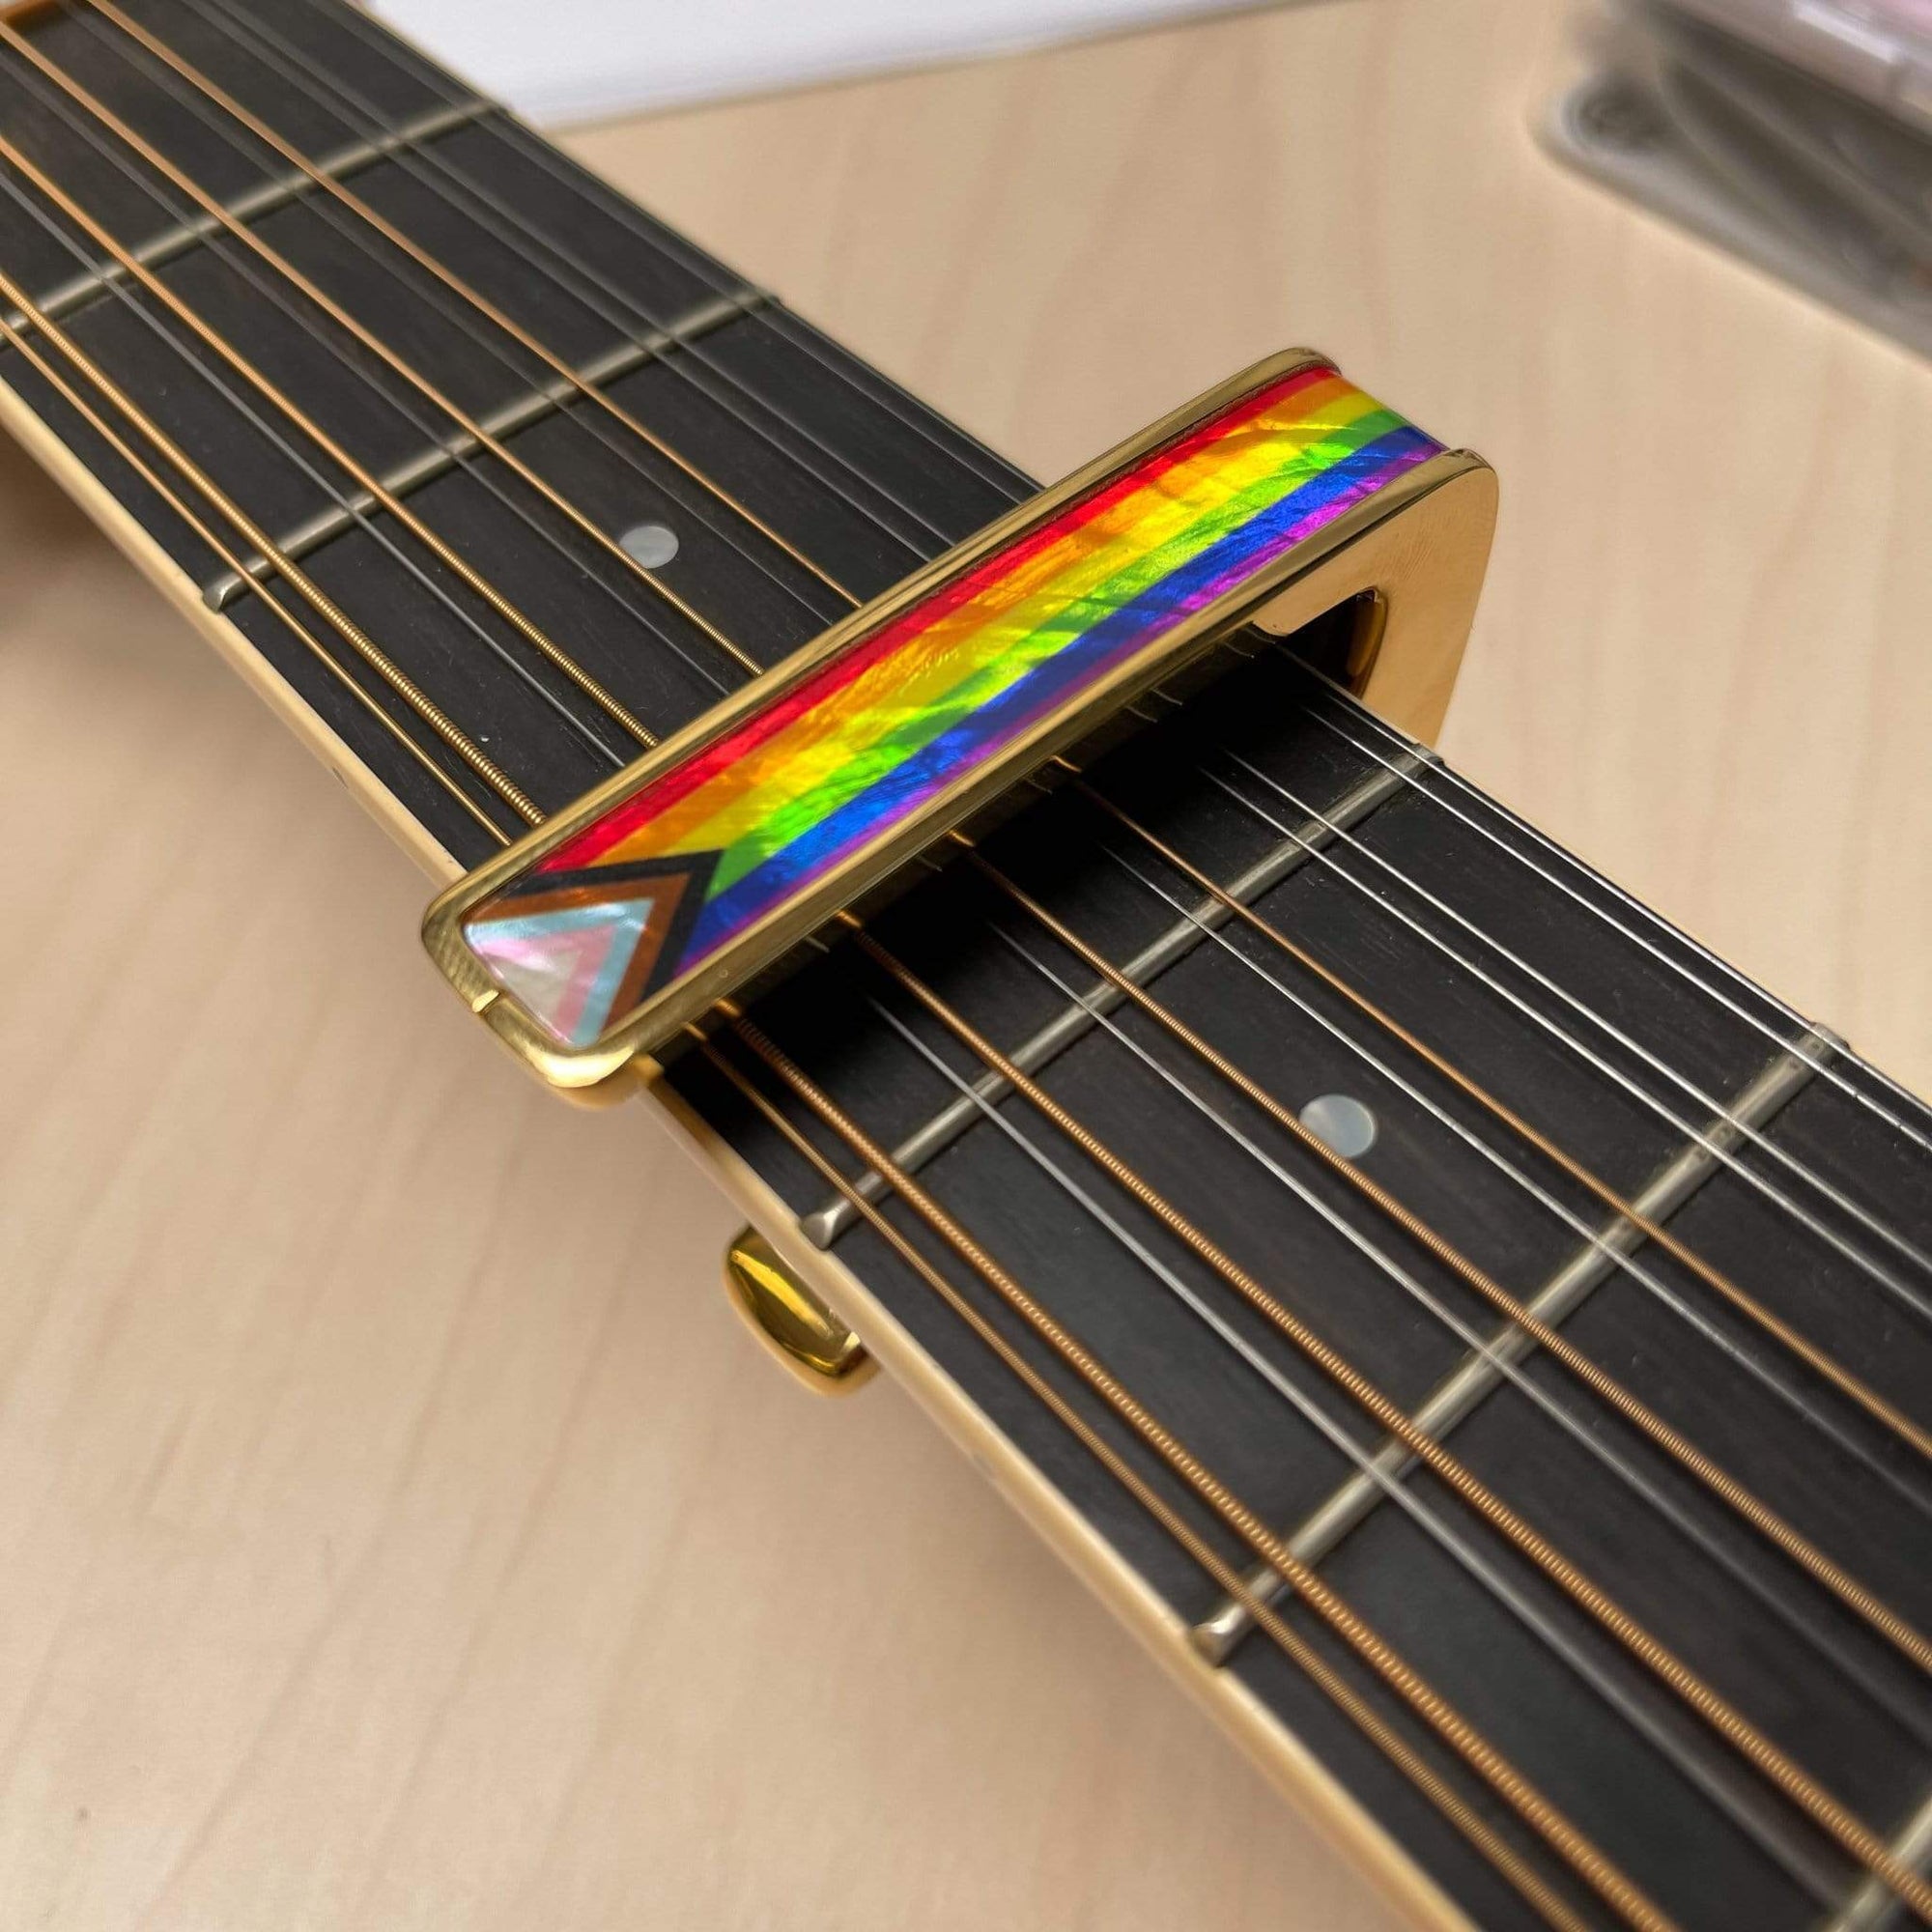 guitars with gay flag colors